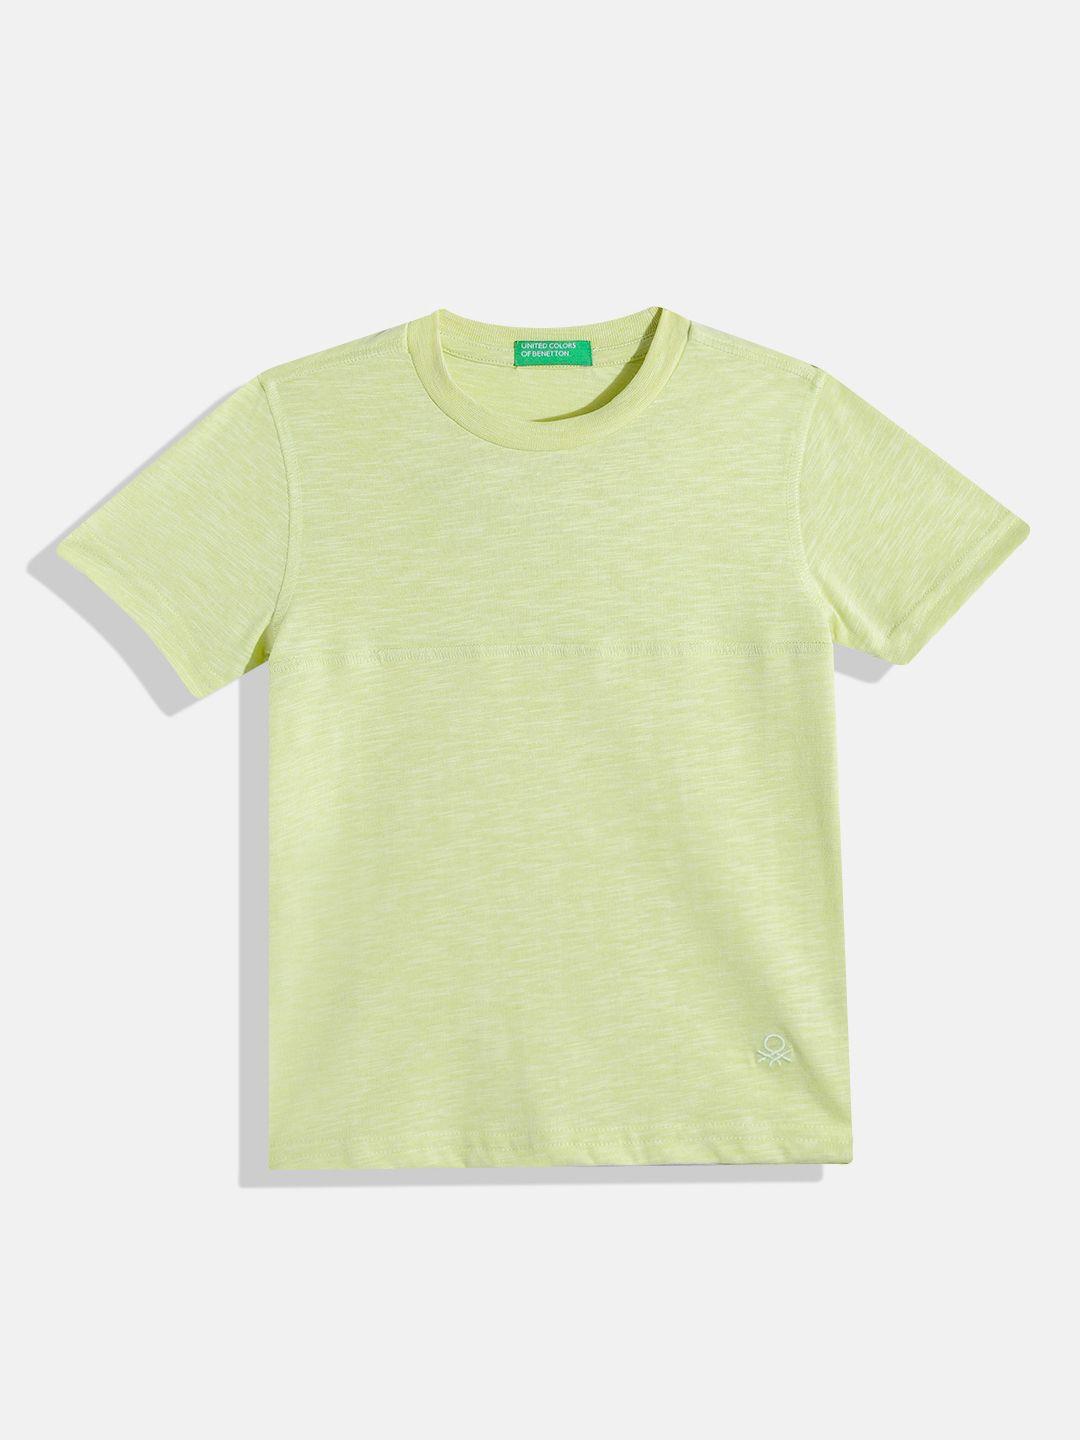 united-colors-of-benetton-boys-solid-t-shirt